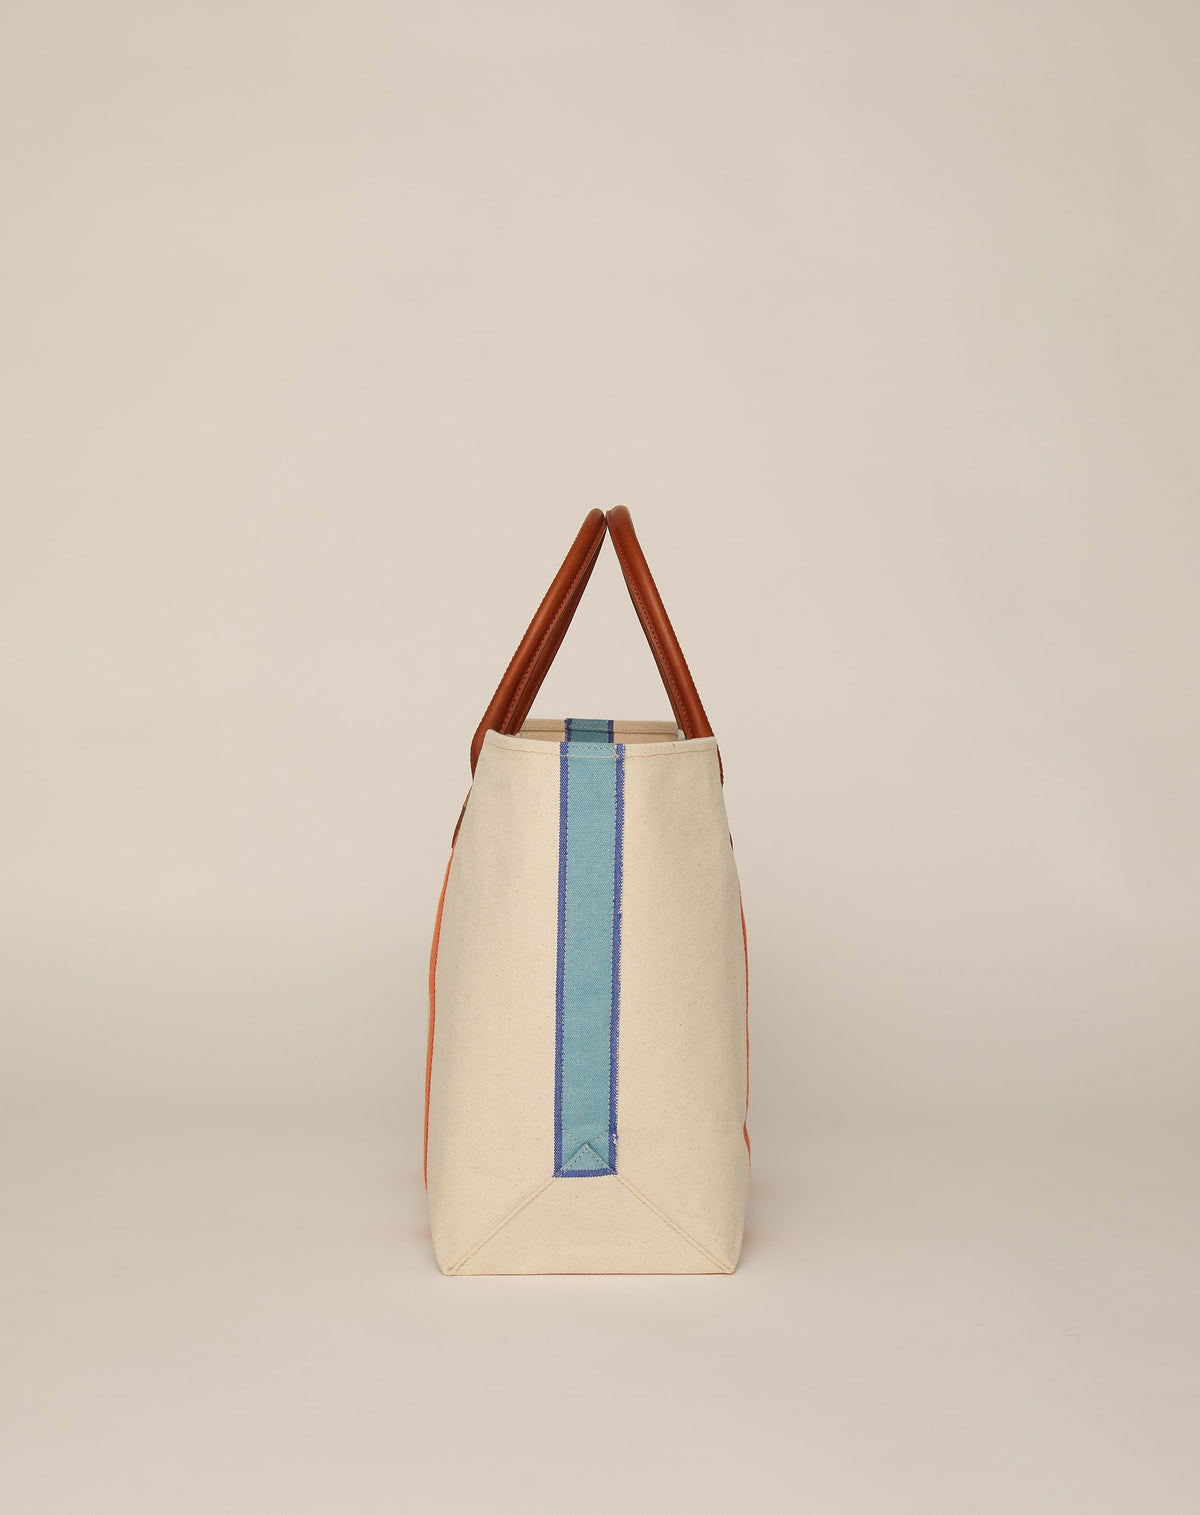 Profile image of classic canvas tote bag in natural ecru colour with leather handles and contrasting orange stripes.